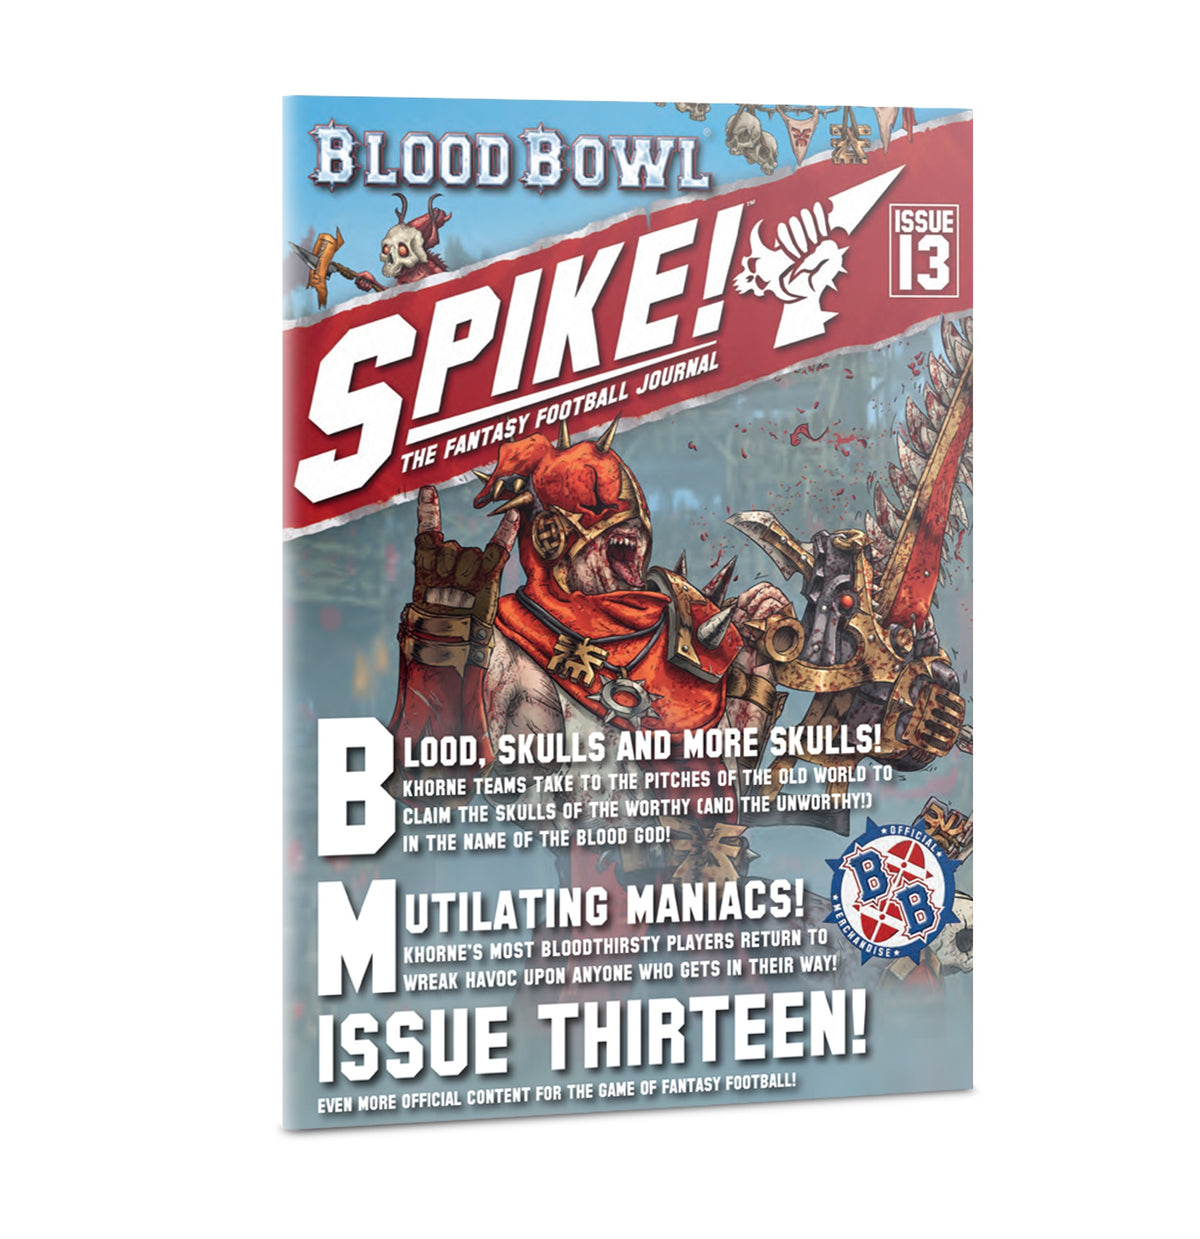 Blood Bowl – Spike Journal Issue 13 (200-95)